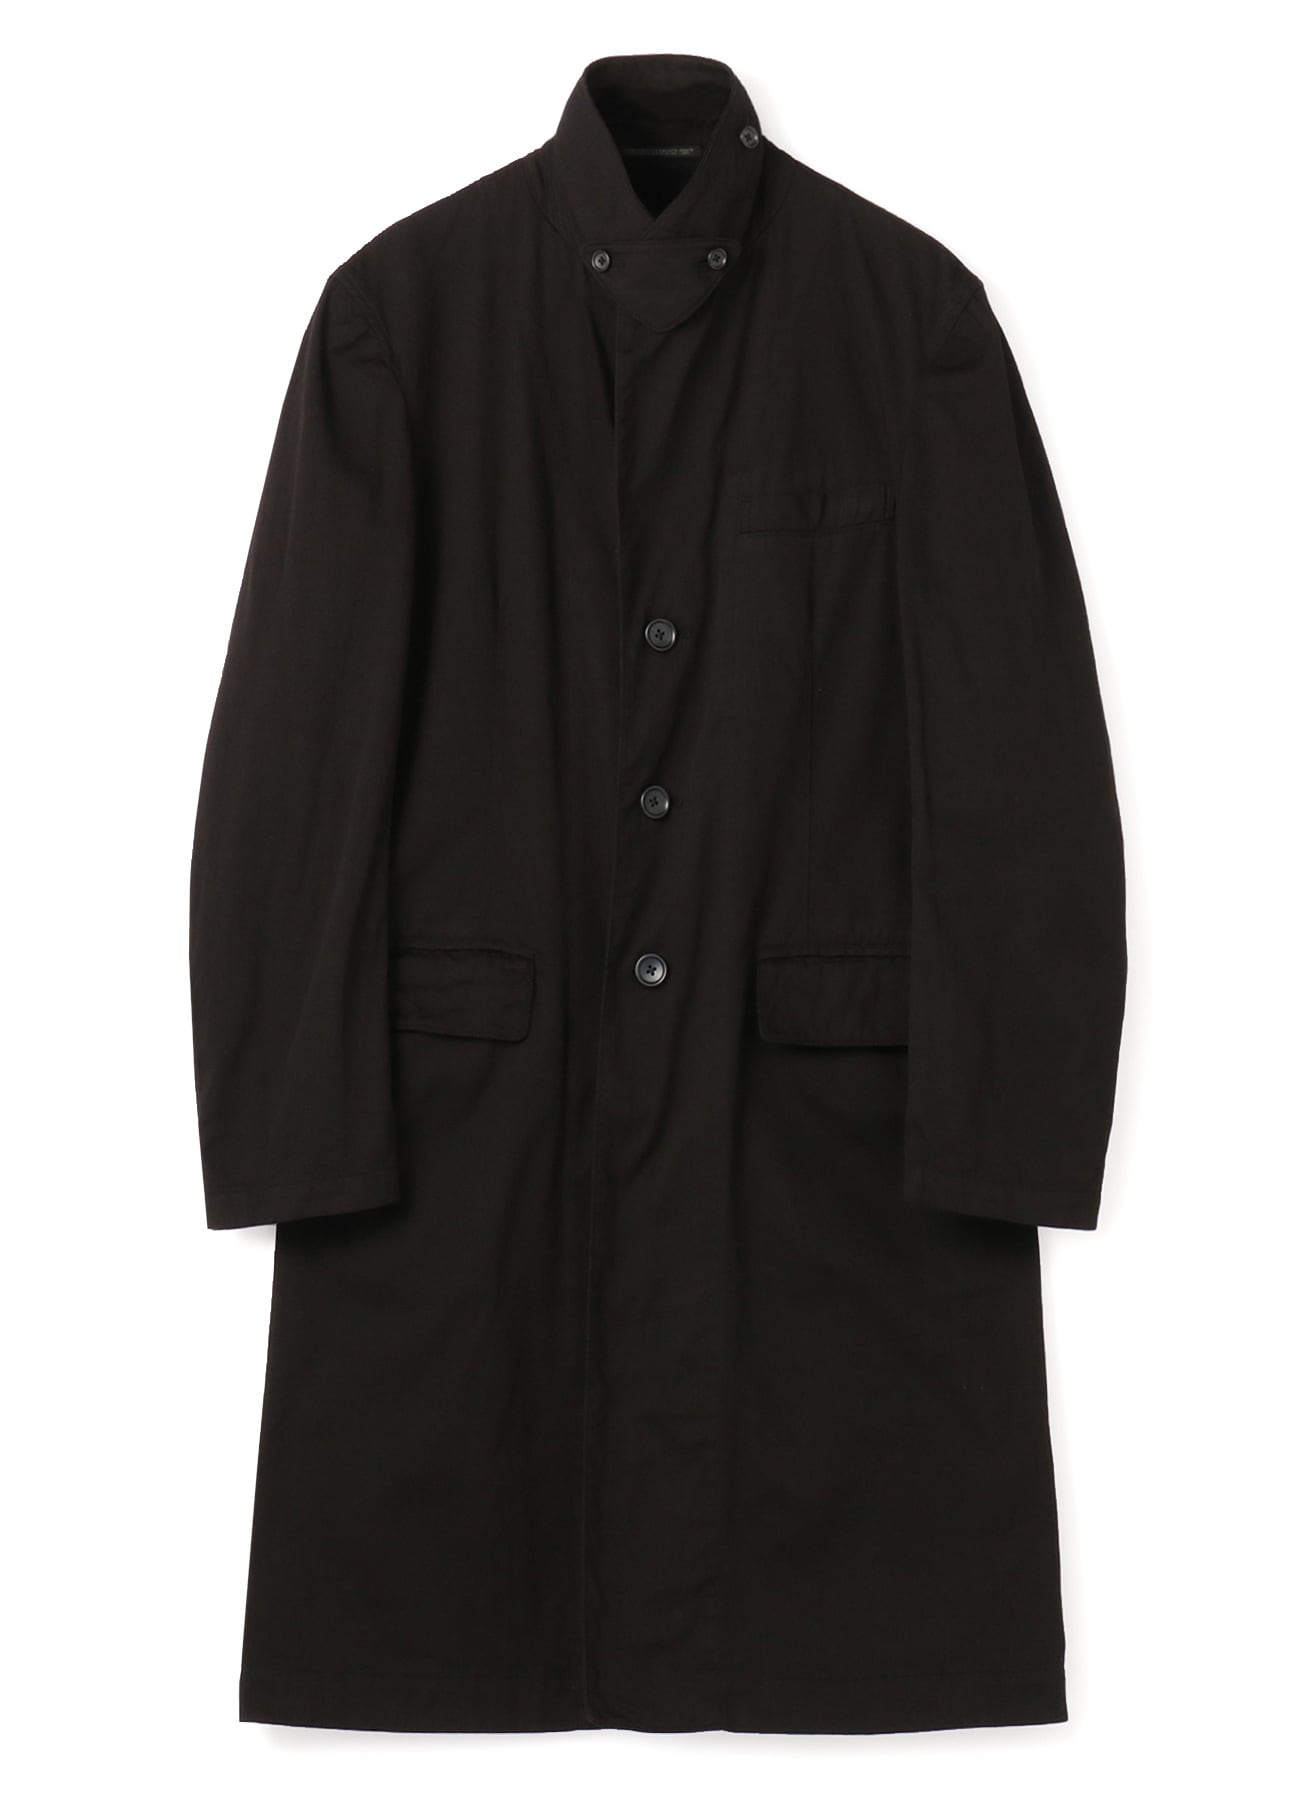 DYEING COTTON TWILL LONG JACKET (S Black): Vintage | THE SHOP 